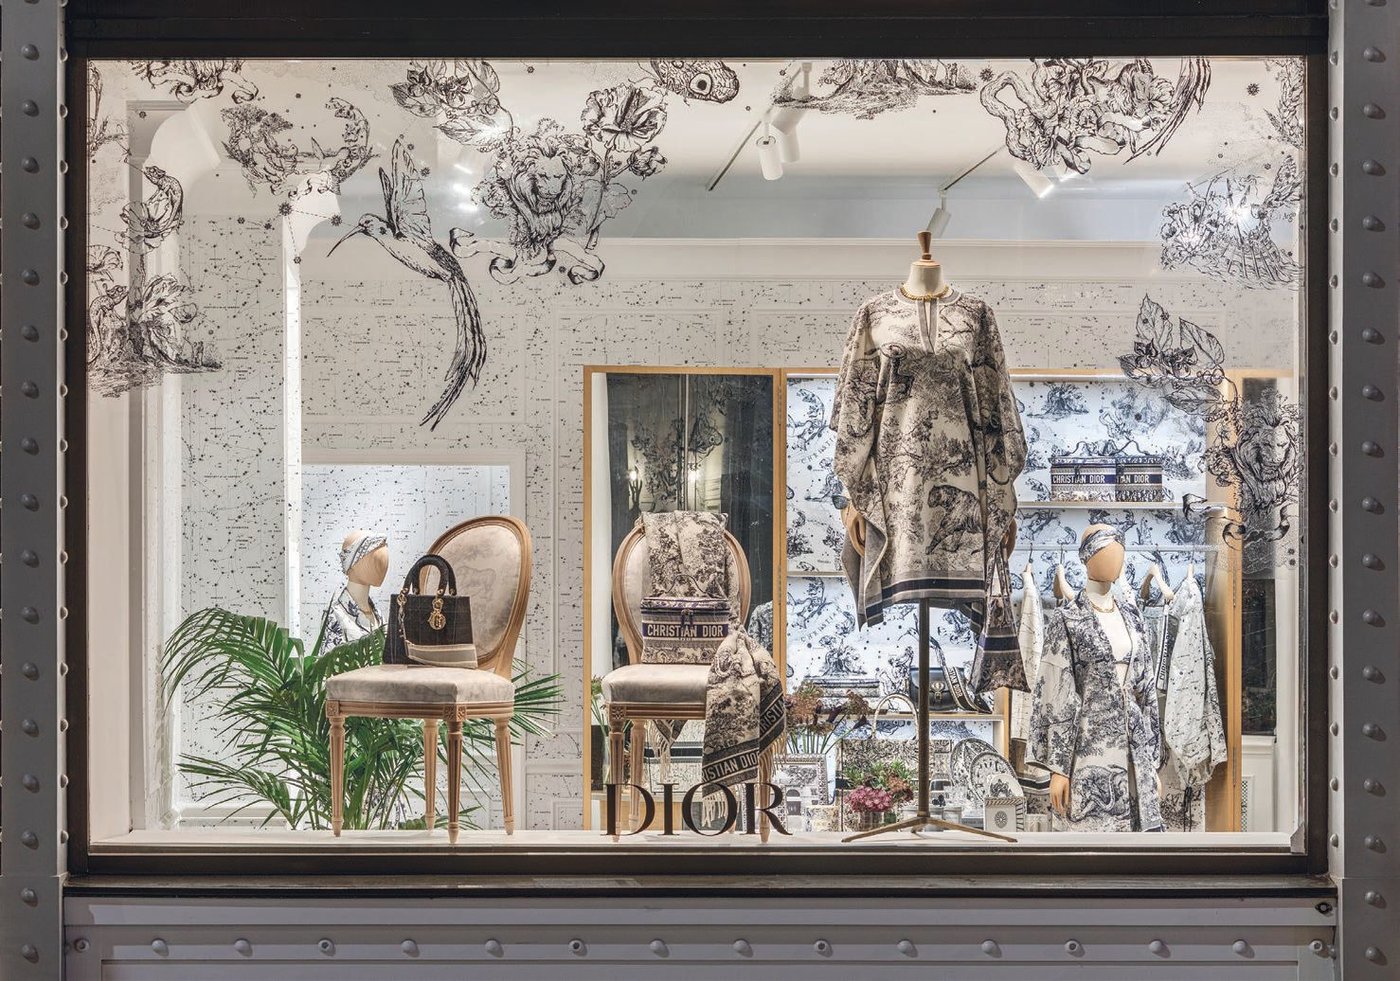 Dior’s chic pop-up is an experience not to miss. PHOTO COURTESY OF DIOR